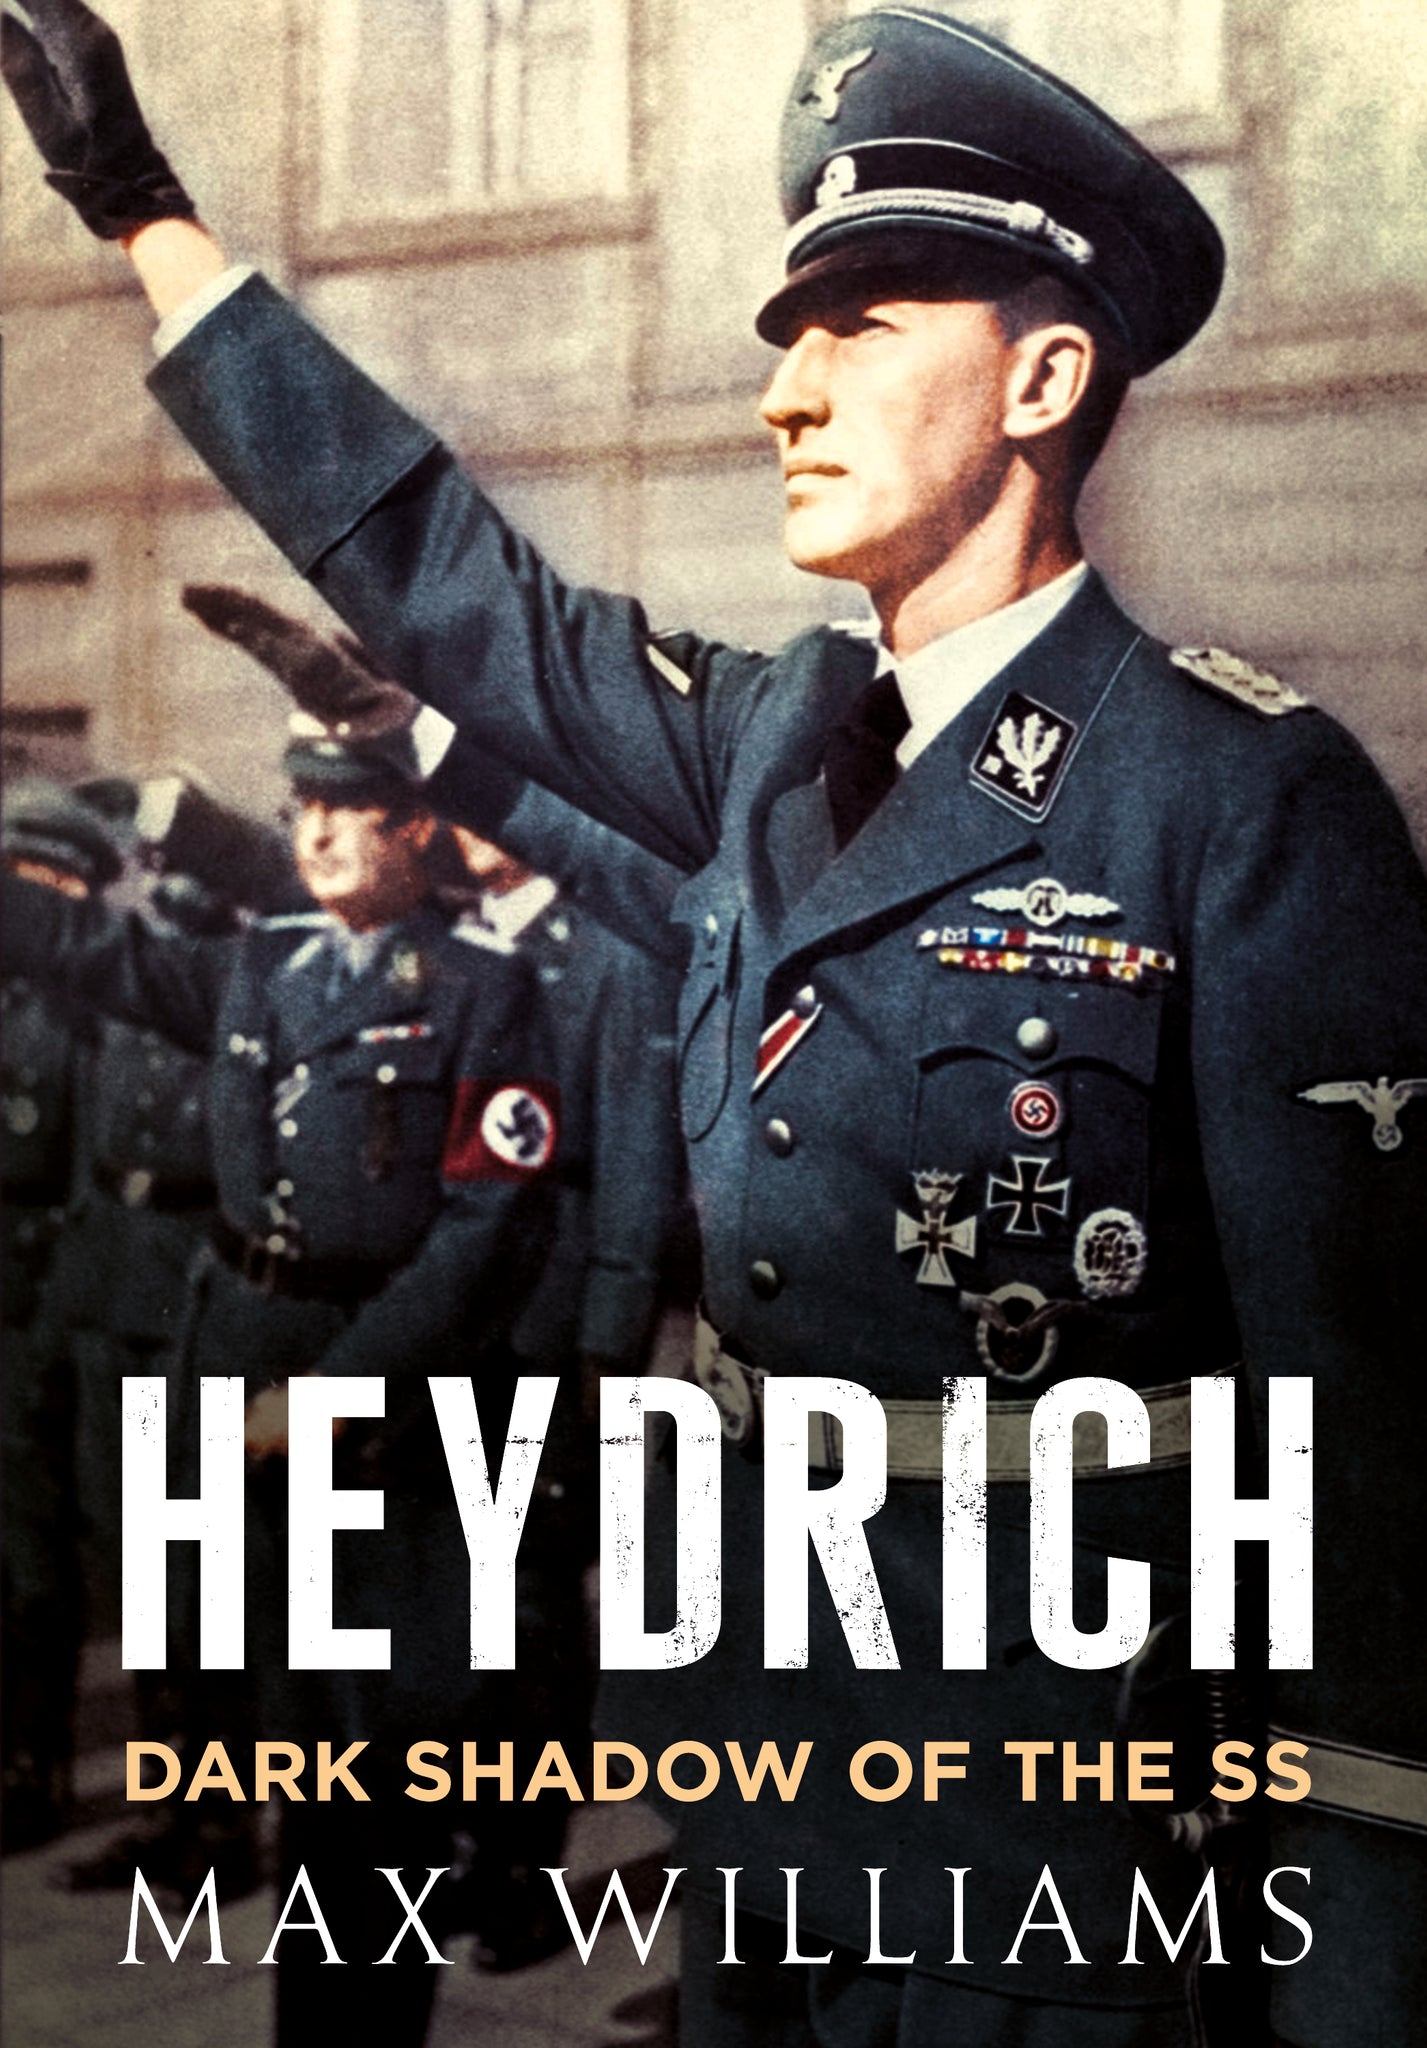 Heydrich: Dark Shadow of the SS - available now from Fonthill Media